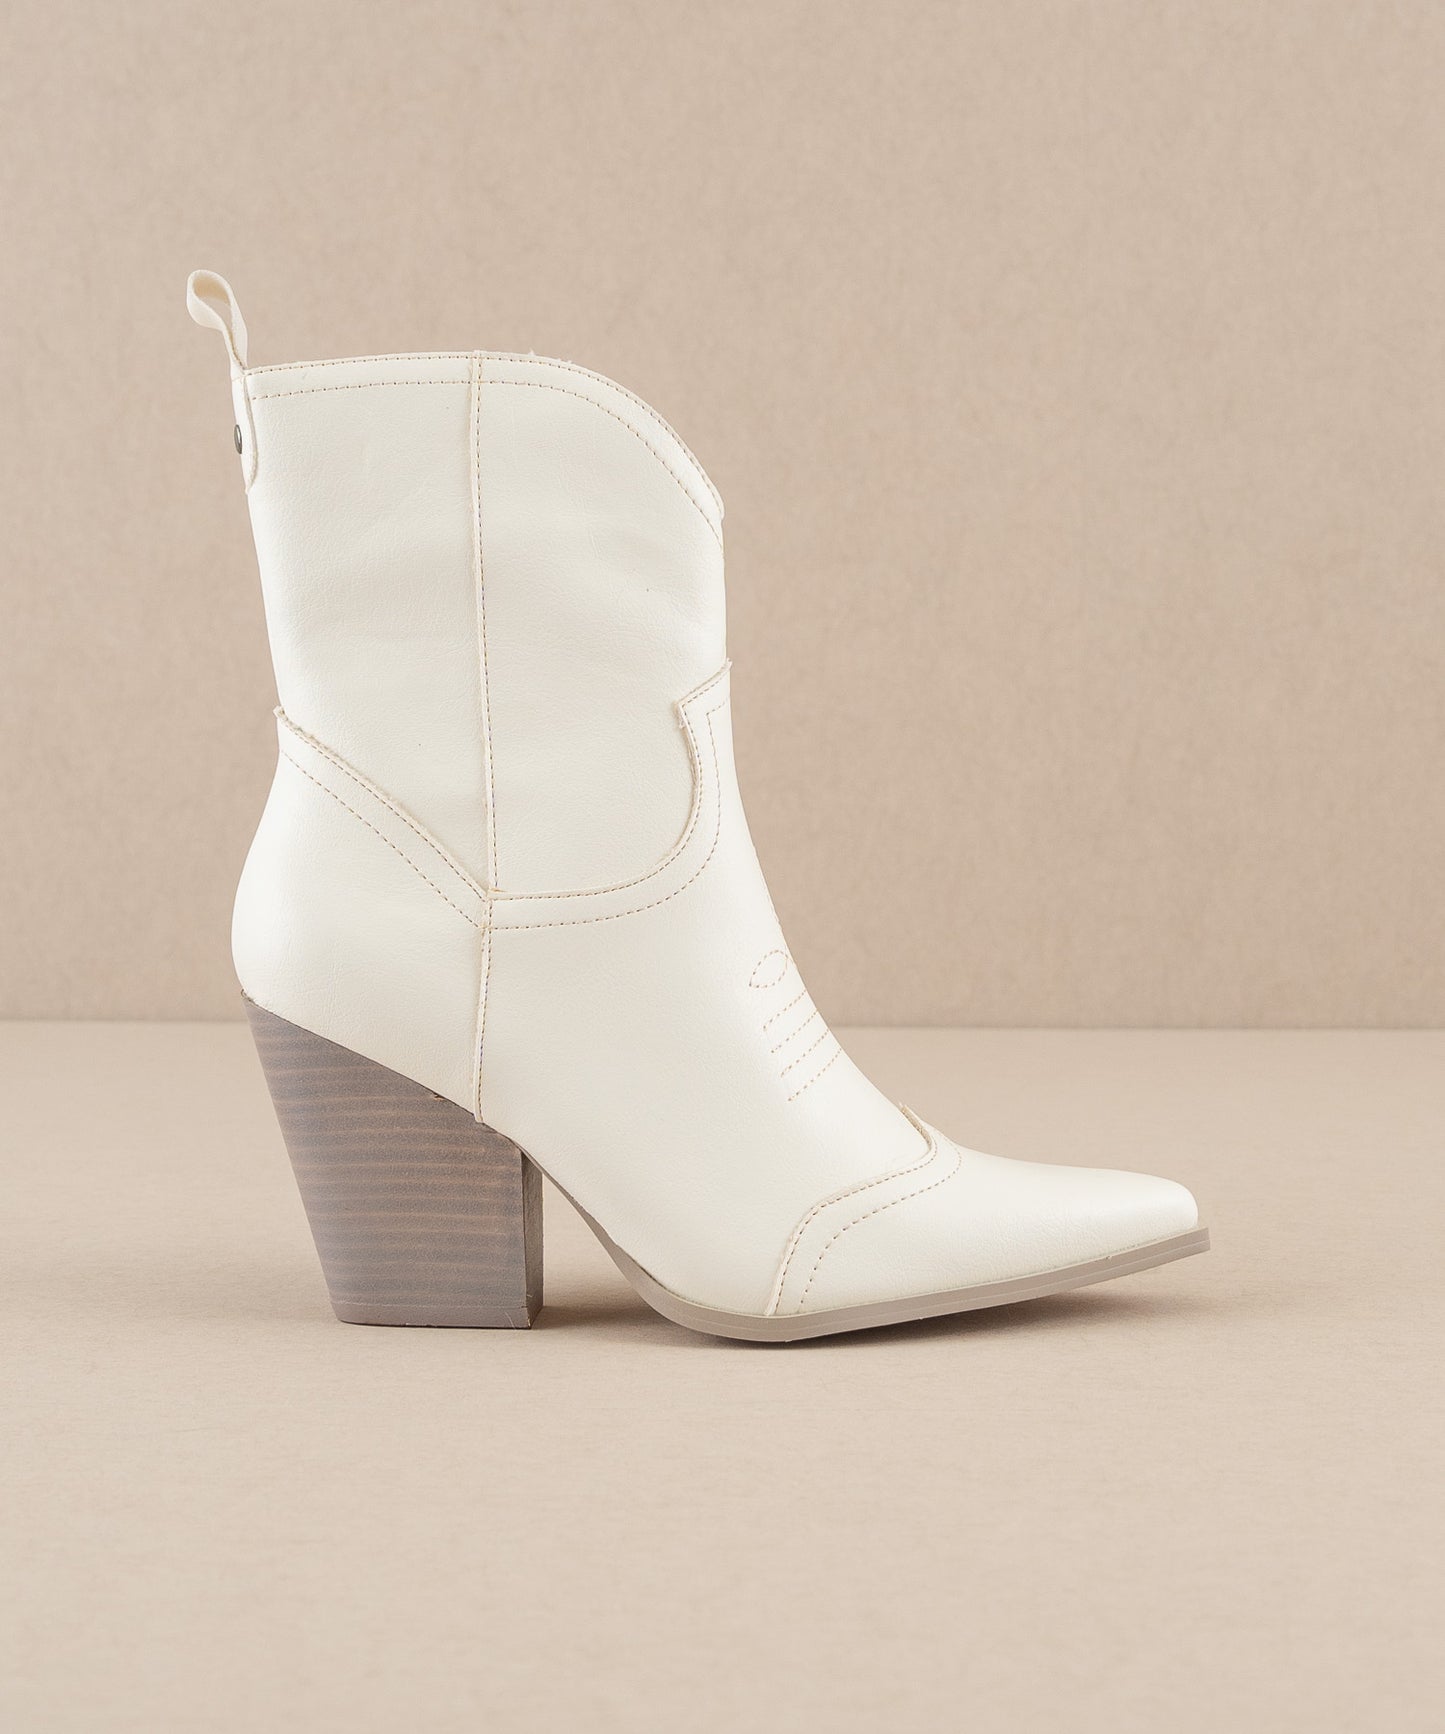 The Ariella - White Western Short Boots